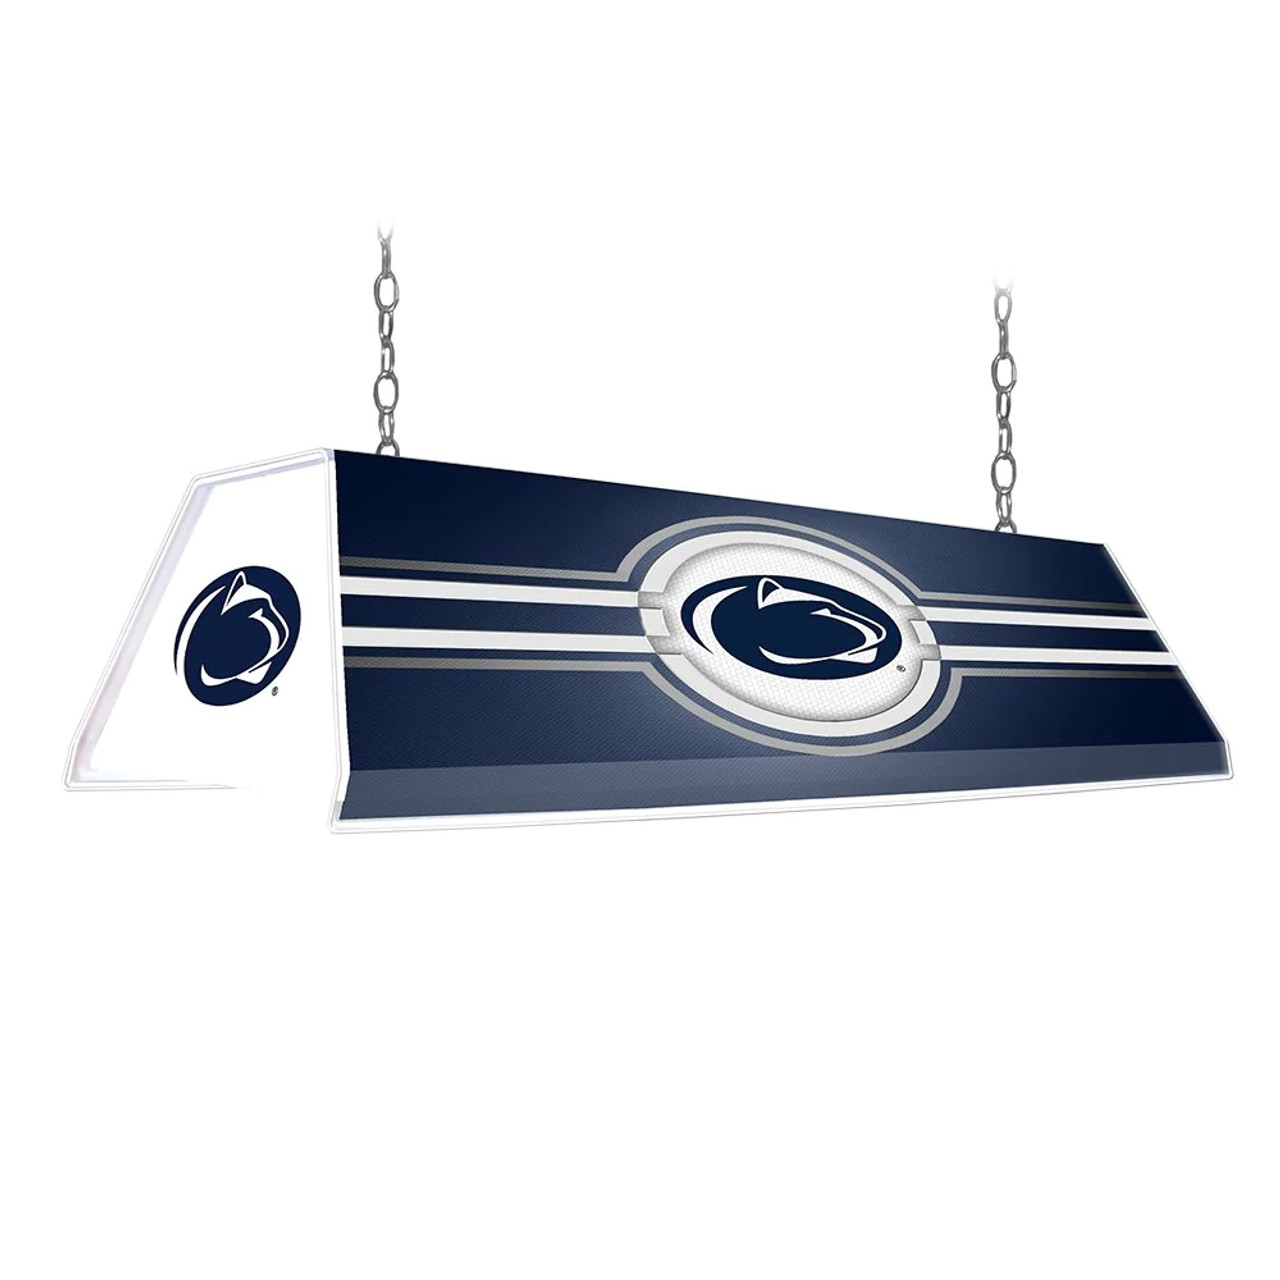 Penn State, PSU, Nittany, Lions,  Edge Glow, Billiard, Pool, Table, Light, The Fan Brand, NCPNST-320-01A, NCPNST-320-01B, 689481024585